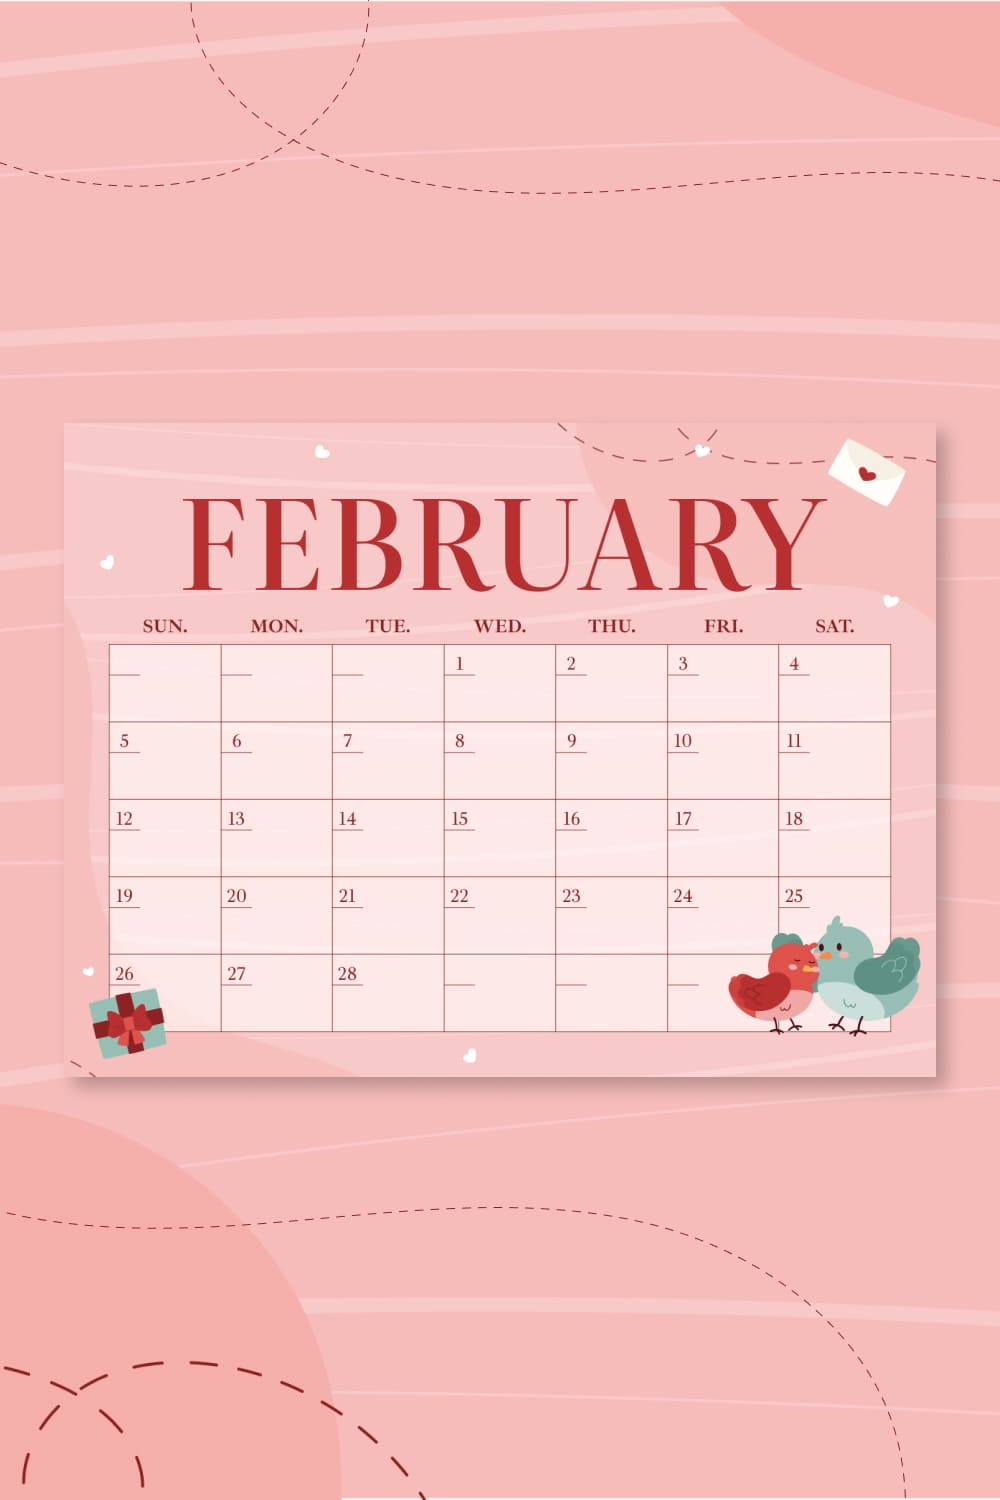 Free Calendar for February, picture for pinterest.